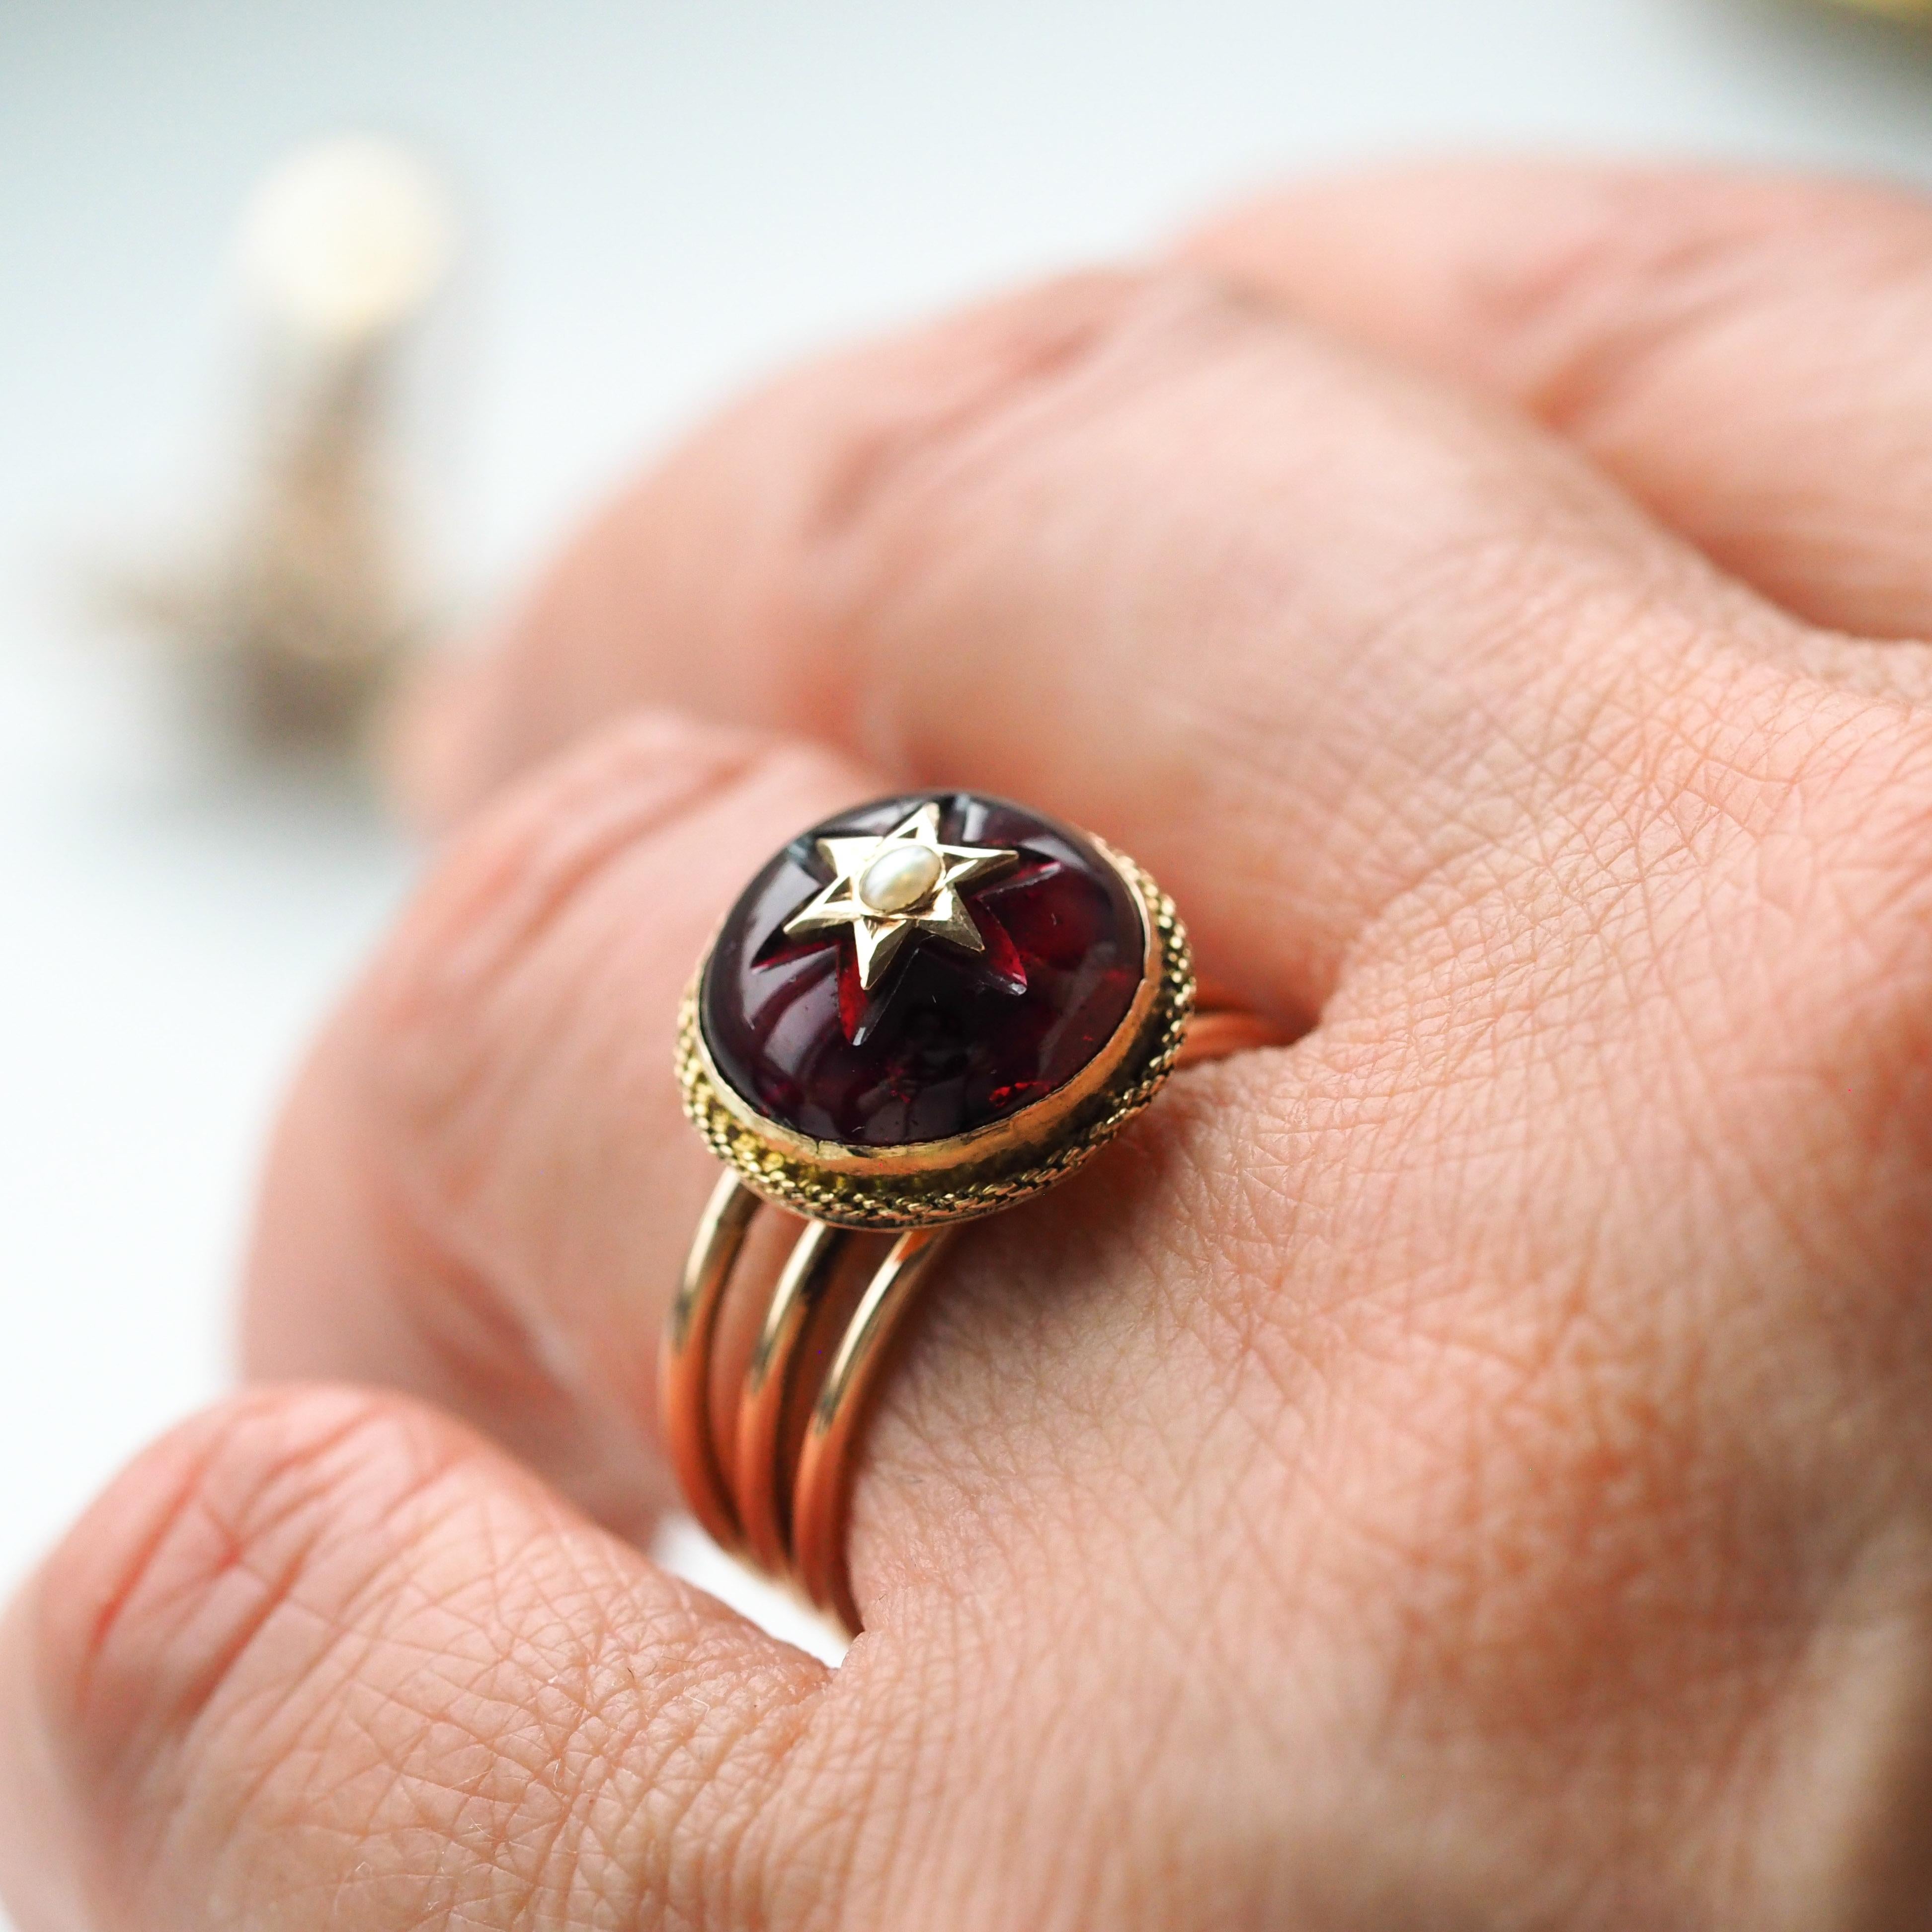 Antique Victorian 14K Gold Garnet Star Cabochon Ring with Seed Pearl - c.1880 For Sale 9